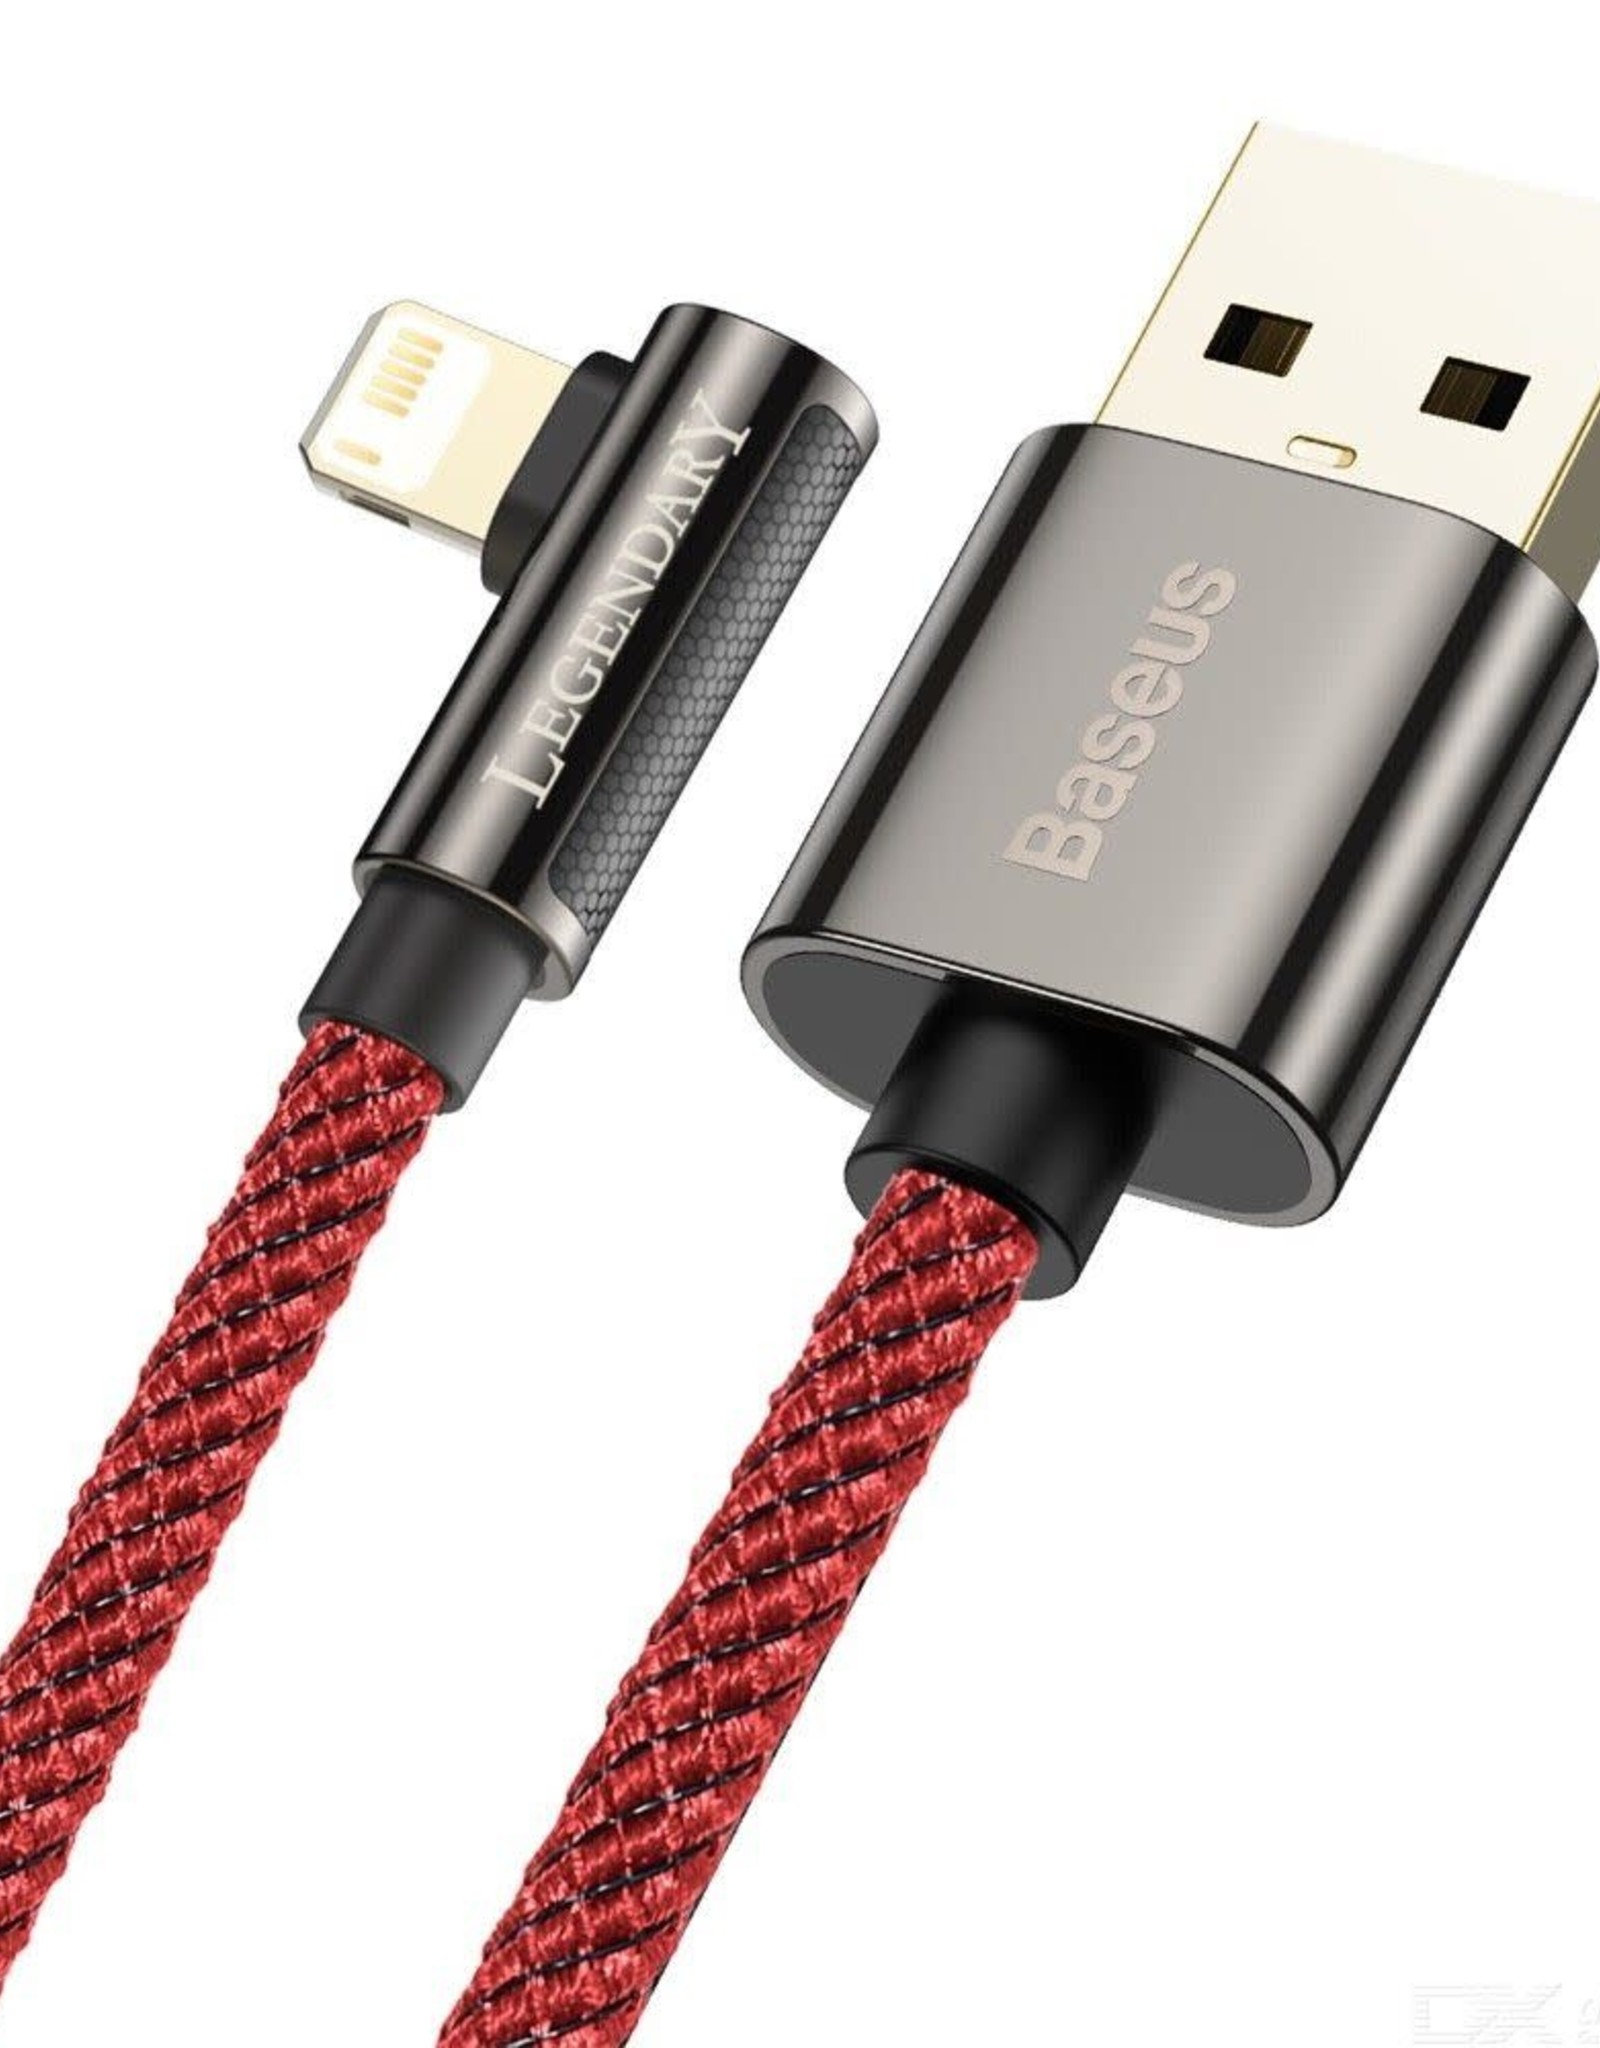 Baseus Legend Series Elbow Fast Charging Data Cable USB to iP 2.4A 2m